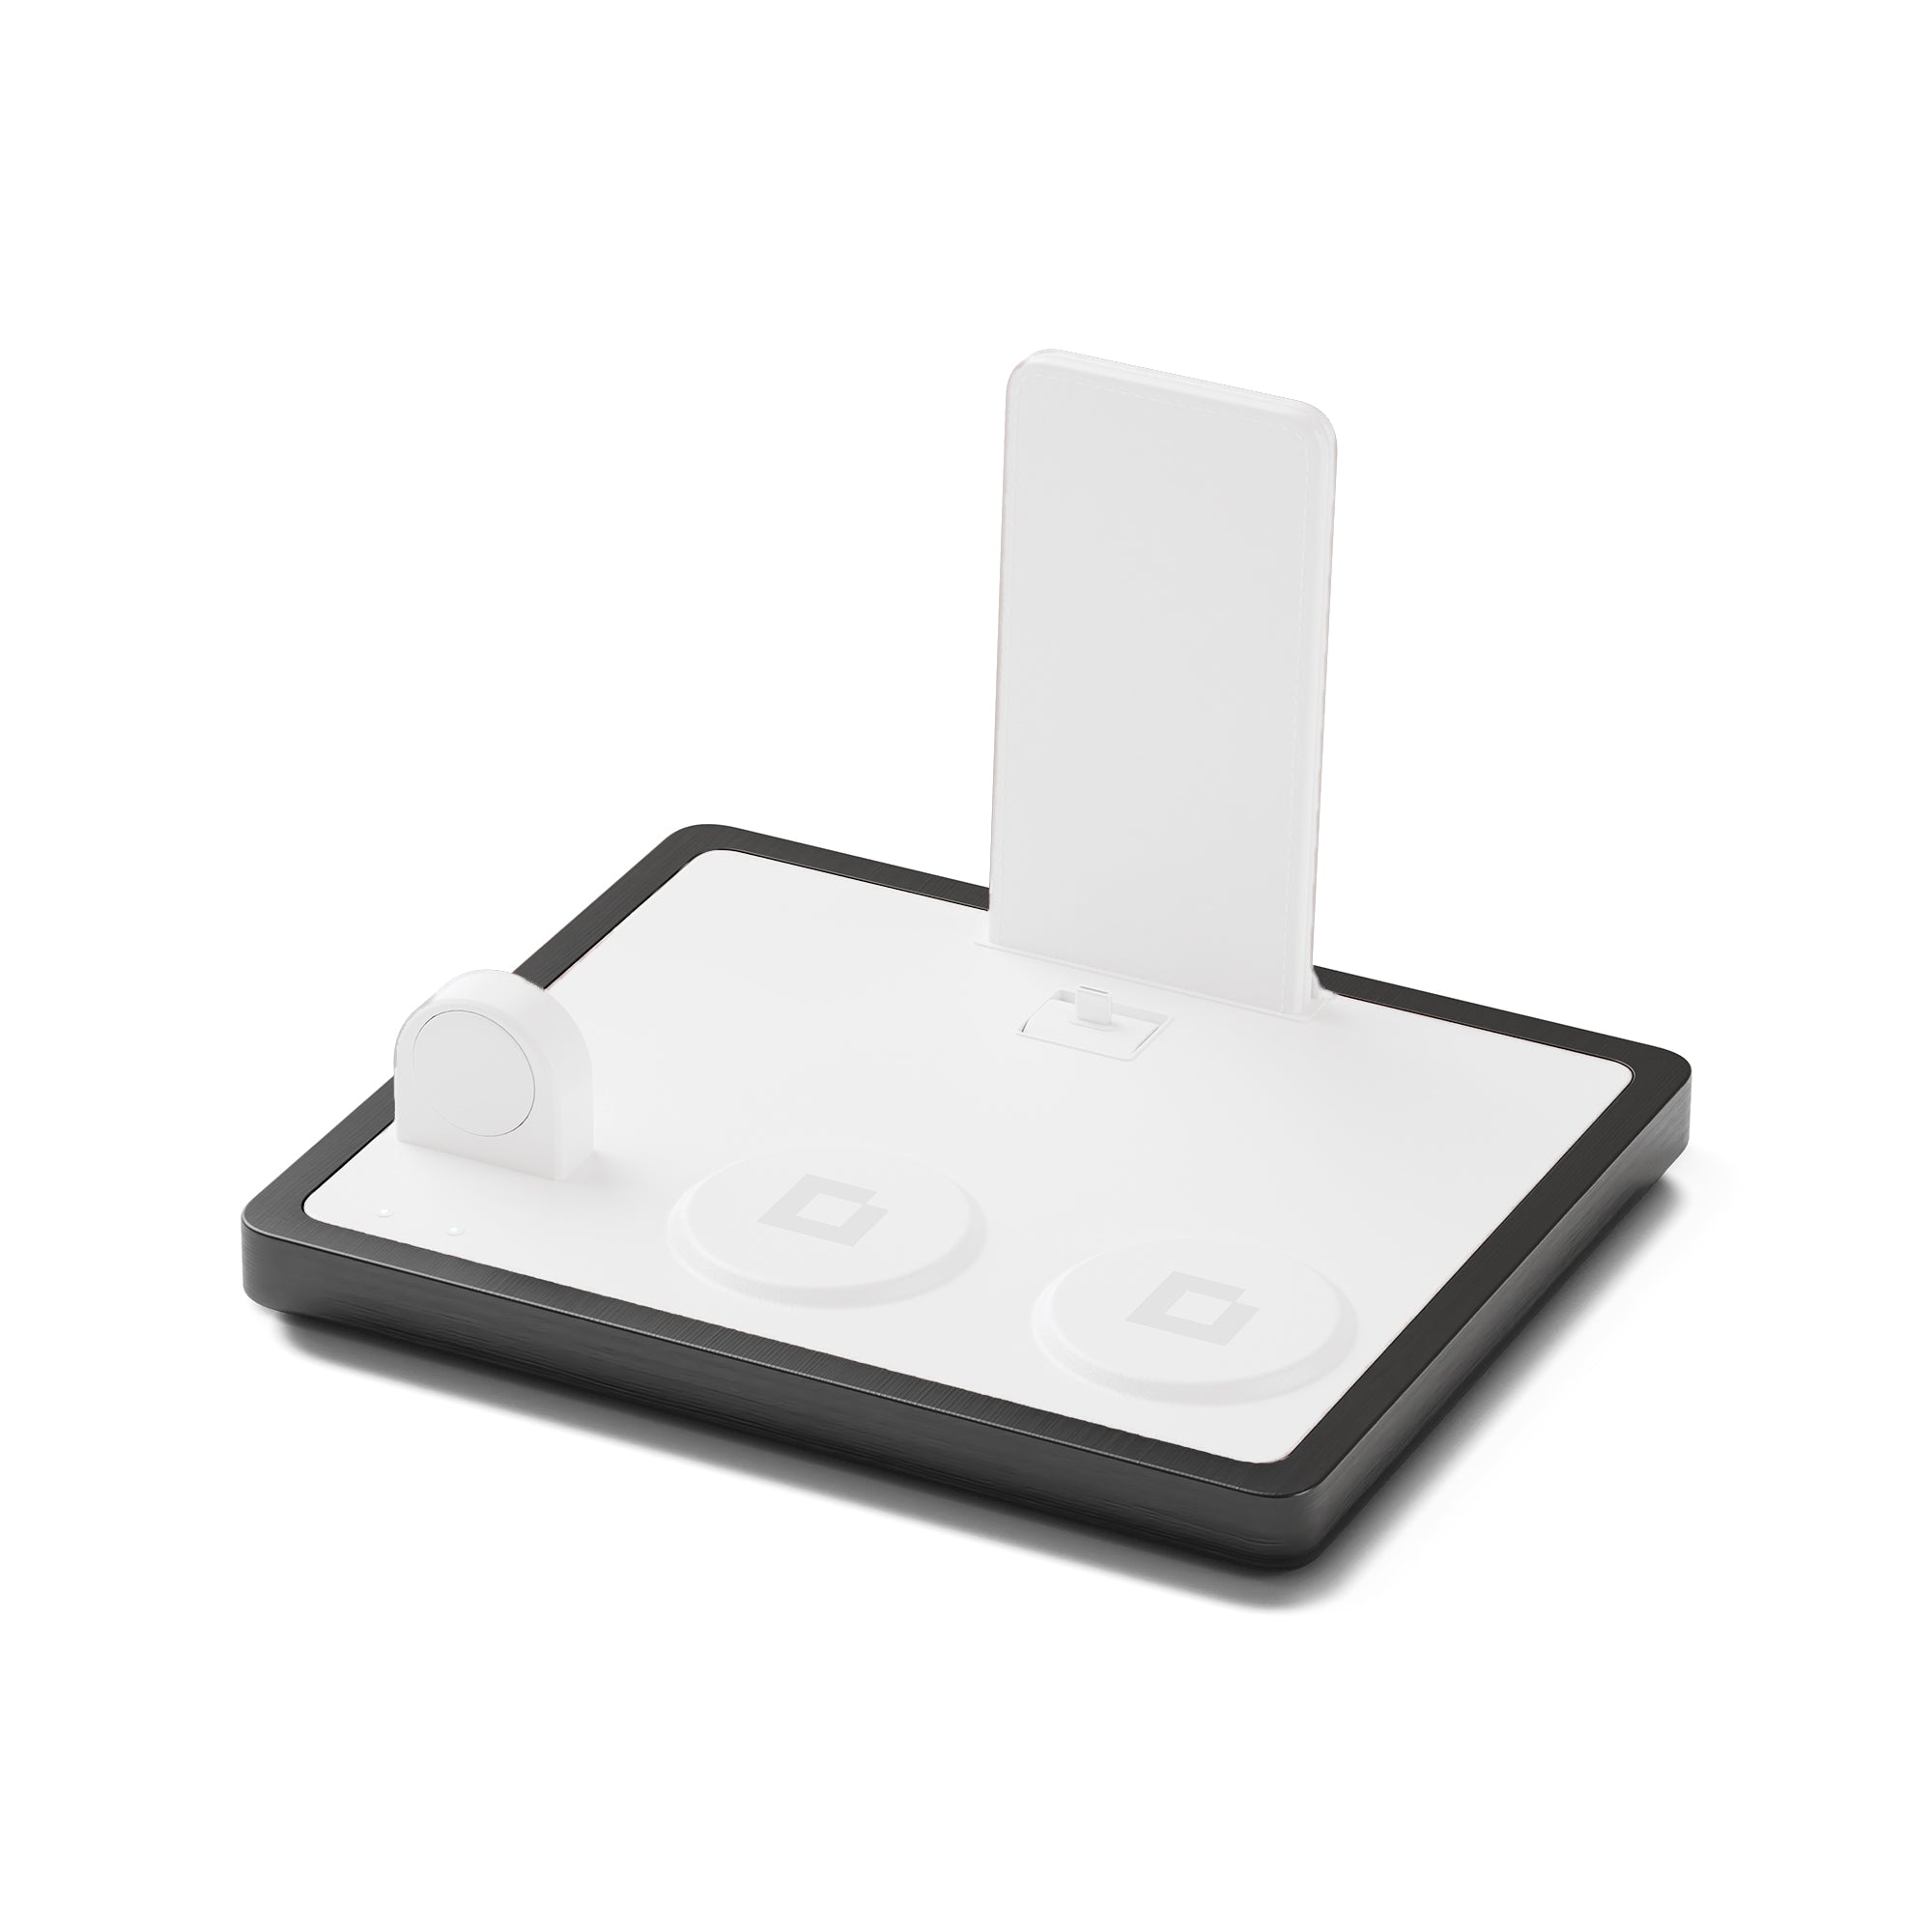 QUAD White - 4-in-1 MagSafe Midnight Black Wireless Charger with iPad Stand Support